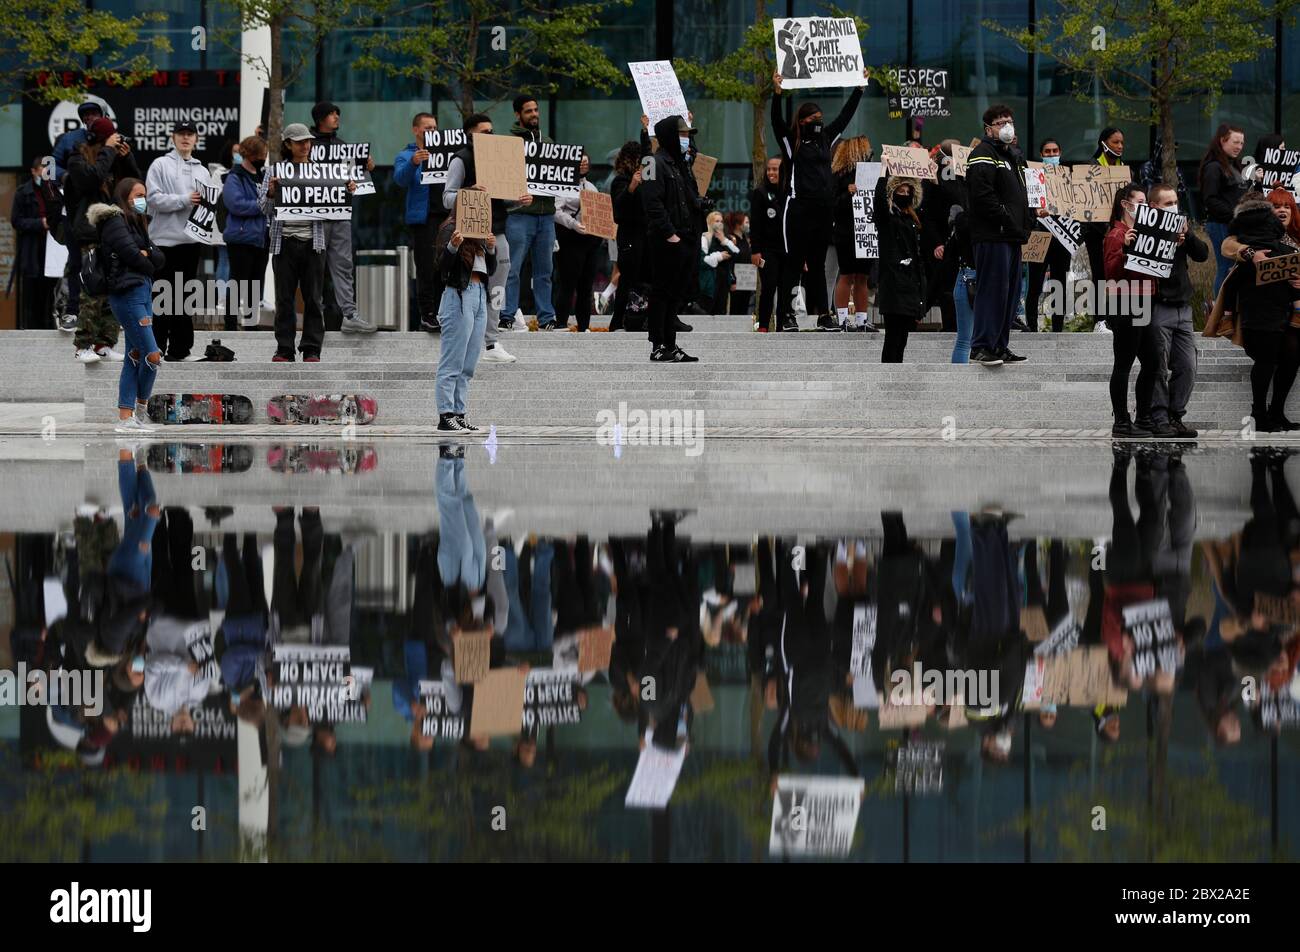 Birmingham, West Midlands, UK. 4th June 2020. Protesters attend a 'Black lives matter' demonstration following the death of American George Floyd while in the custody of Minneapolis police. Credit Darren Staples/Alamy Live News. Stock Photo